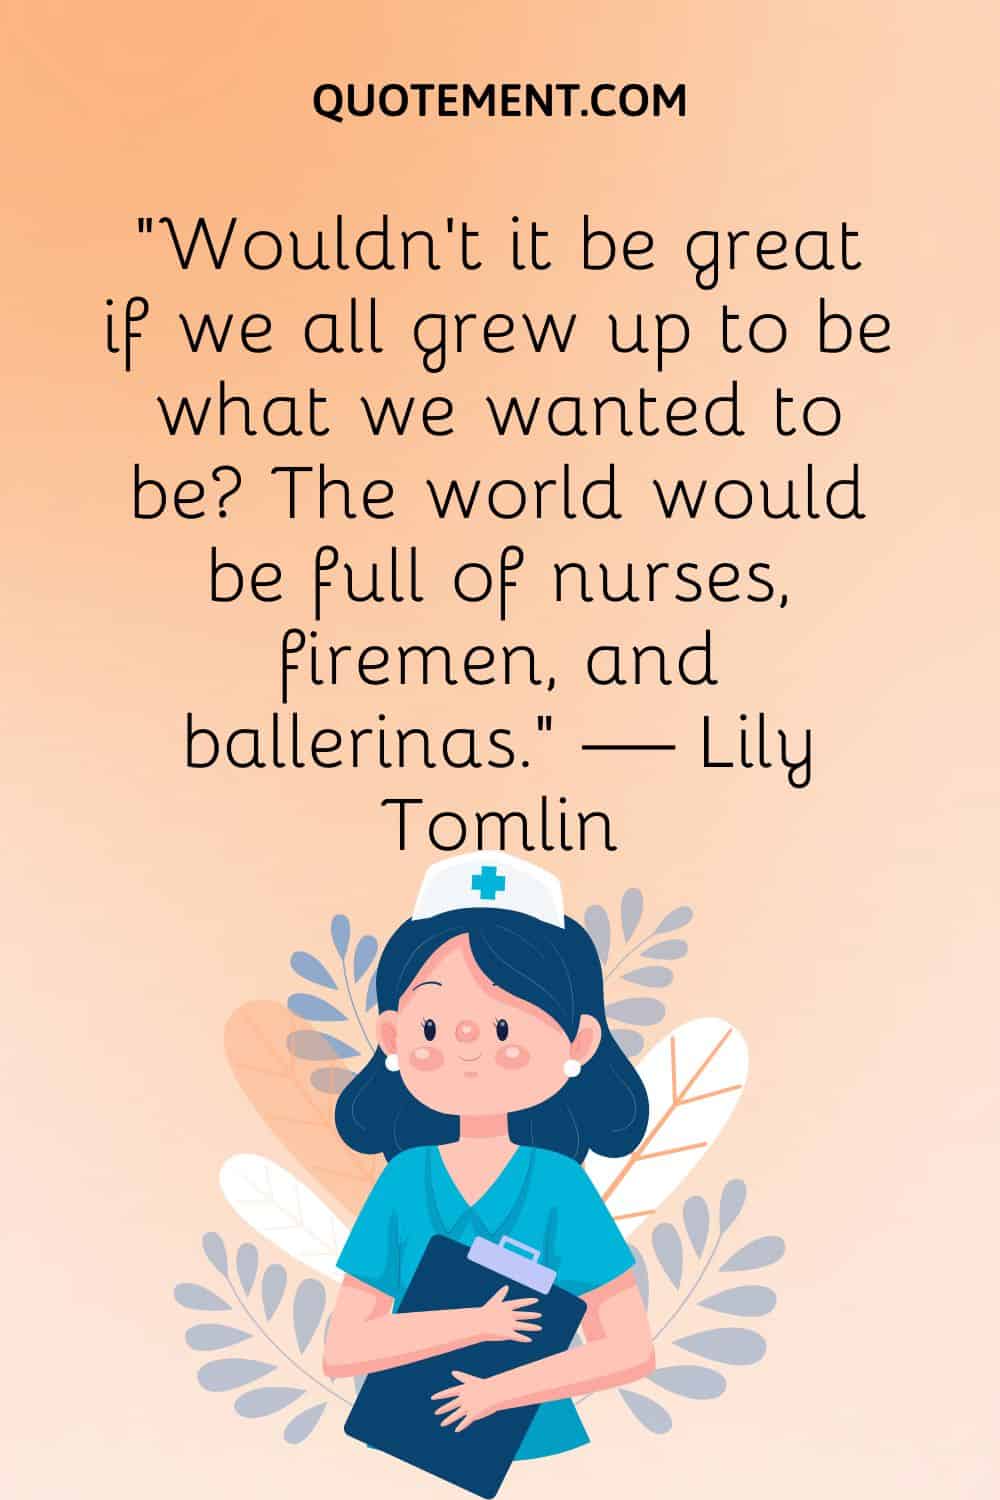 “Wouldn’t it be great if we all grew up to be what we wanted to be The world would be full of nurses, firemen, and ballerinas.” — Lily Tomlin